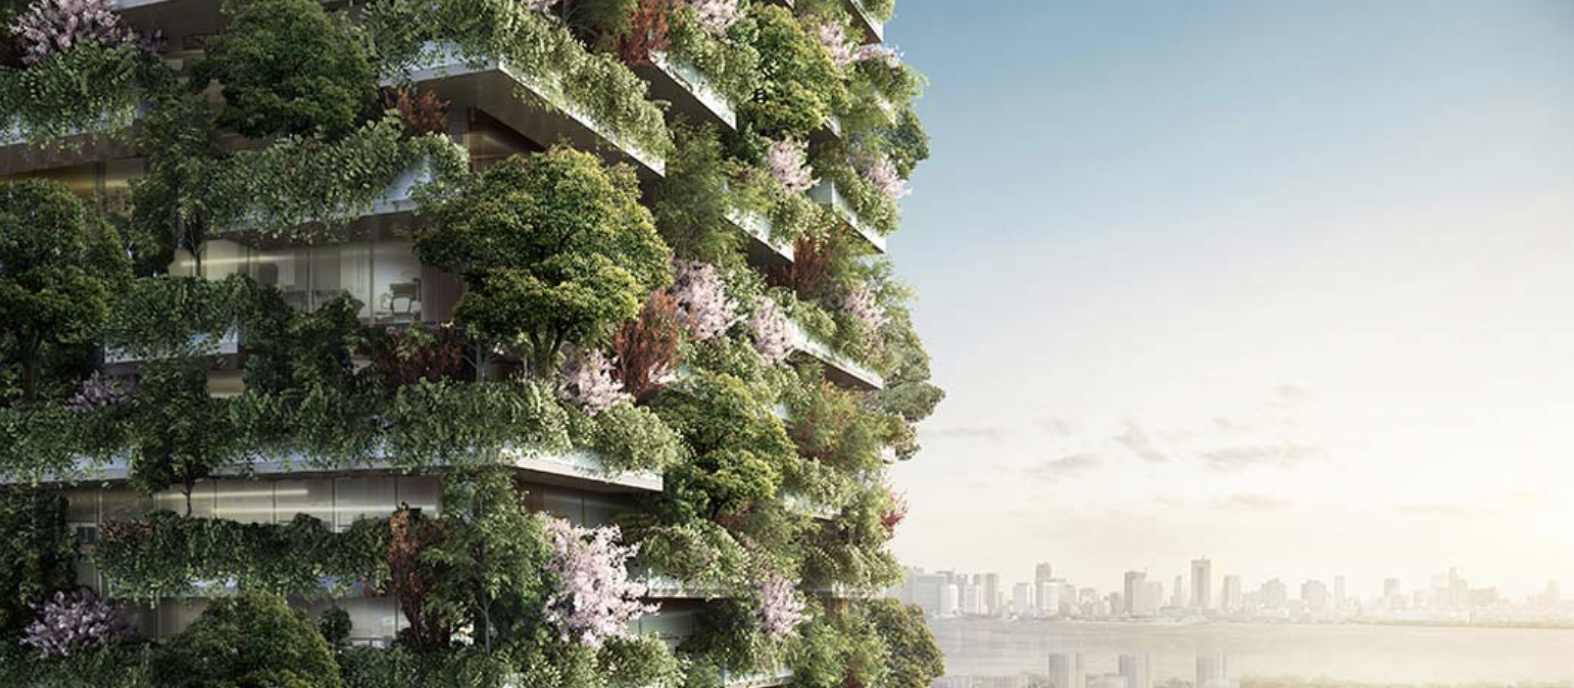 Indias first-ever vertical forest apartments coming up in Hitec City, Hyderabad.